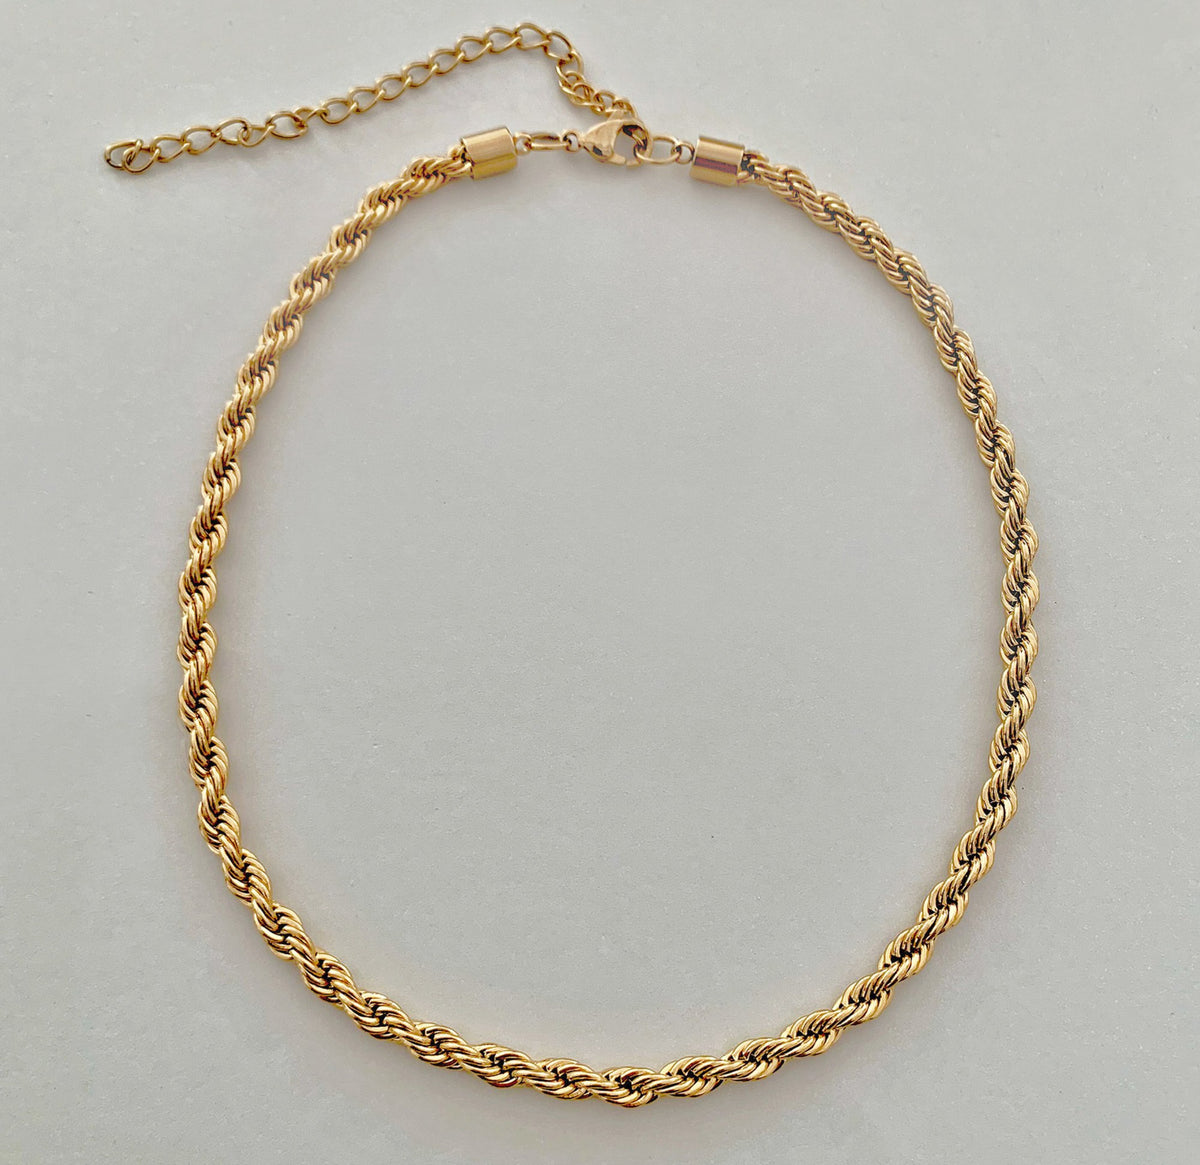 RONNIE ROPE CHAIN NECKLACE - SAMPLE